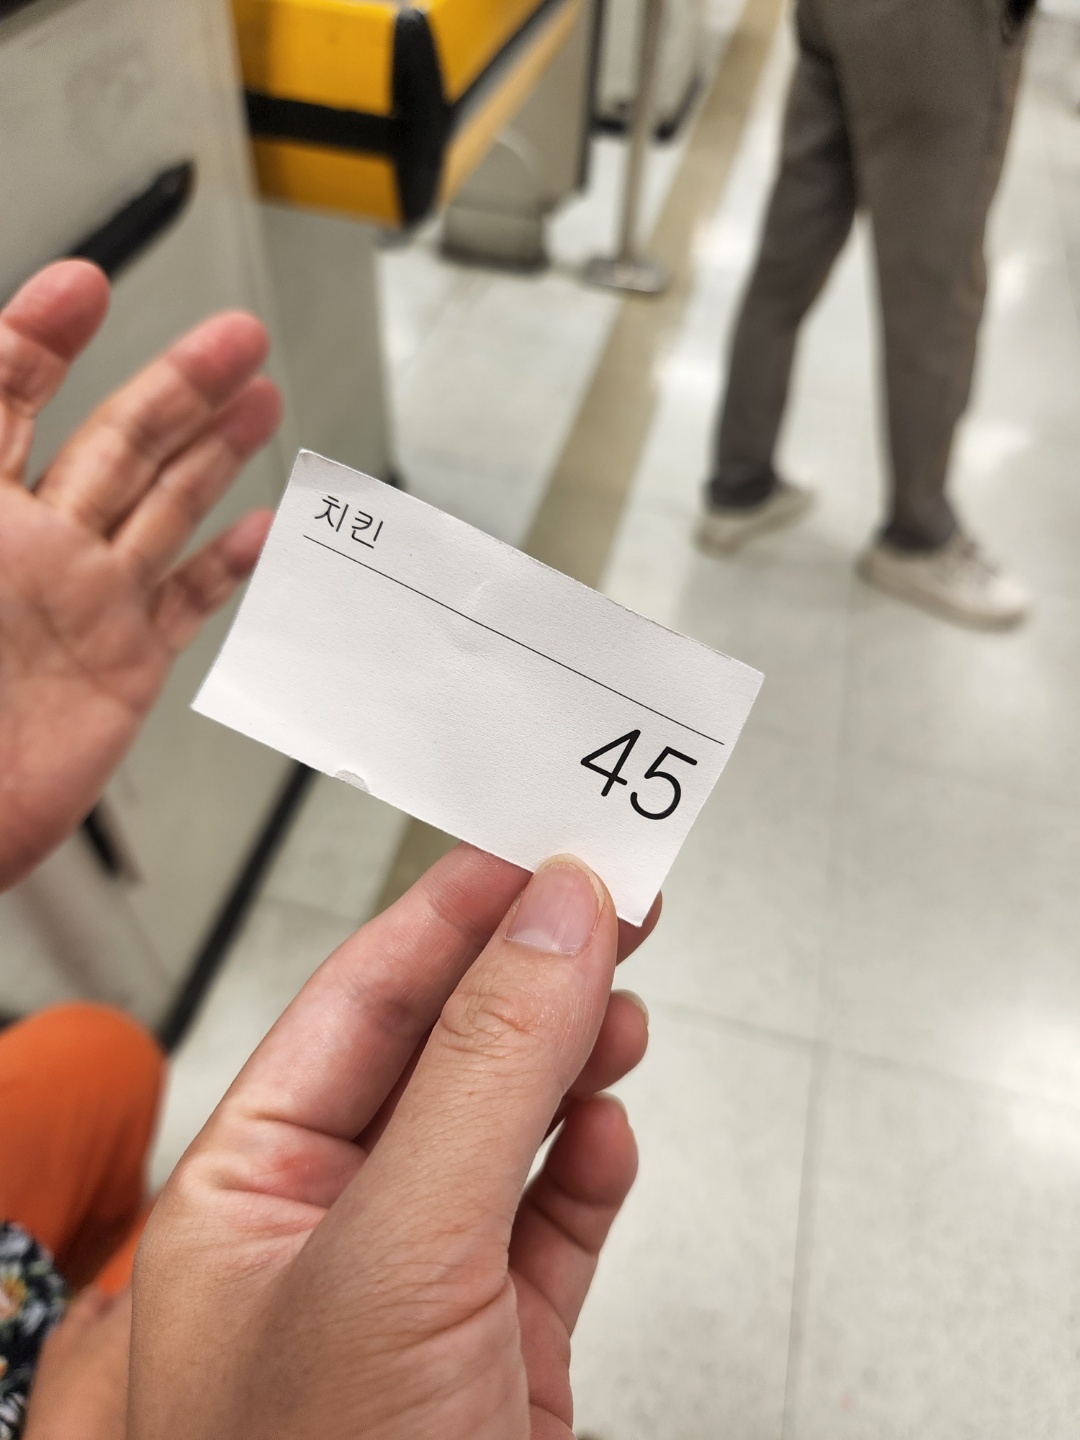 Shin’s queue ticket, which is needed to buy a bucket of fried chicken. (Choi Jae-hee / The Korea Herald)